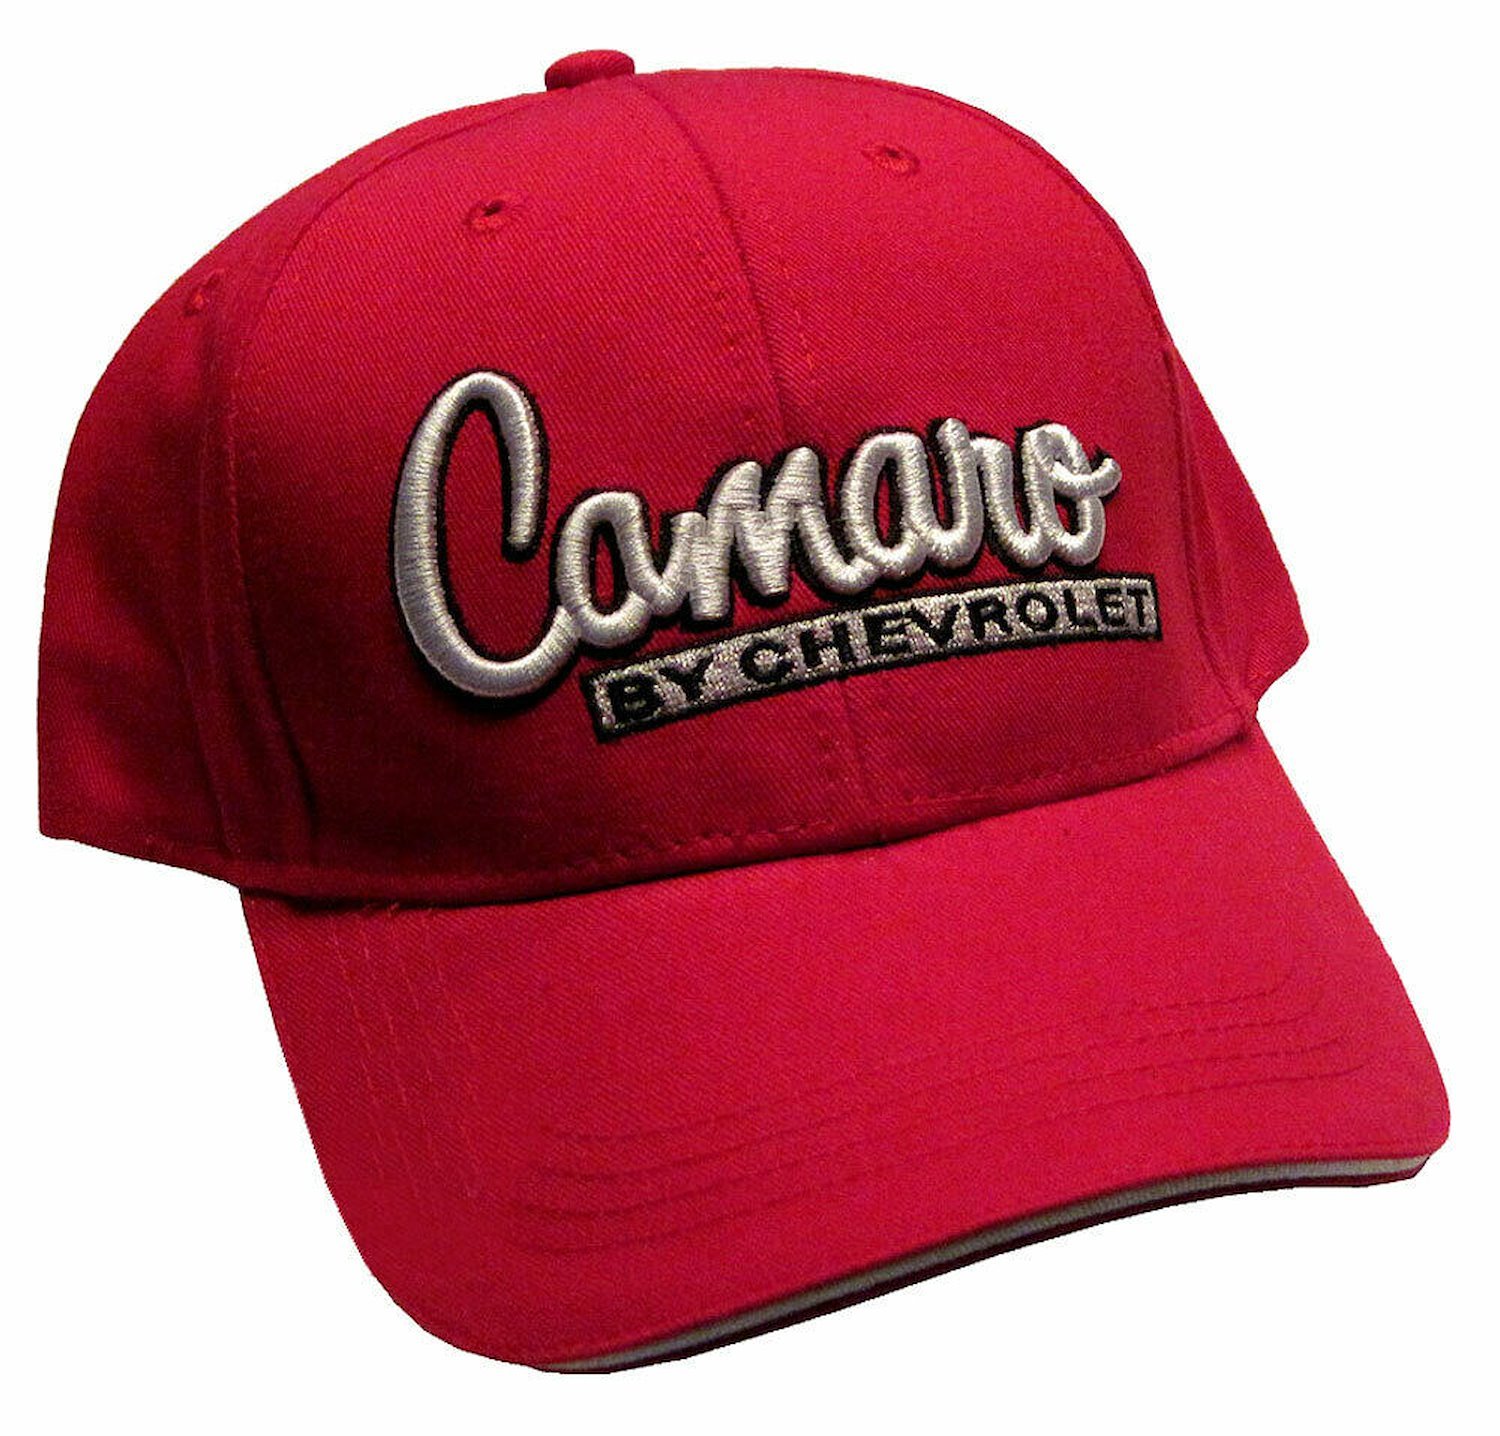 JEGS H238 "Camaro by Chevrolet" Hat